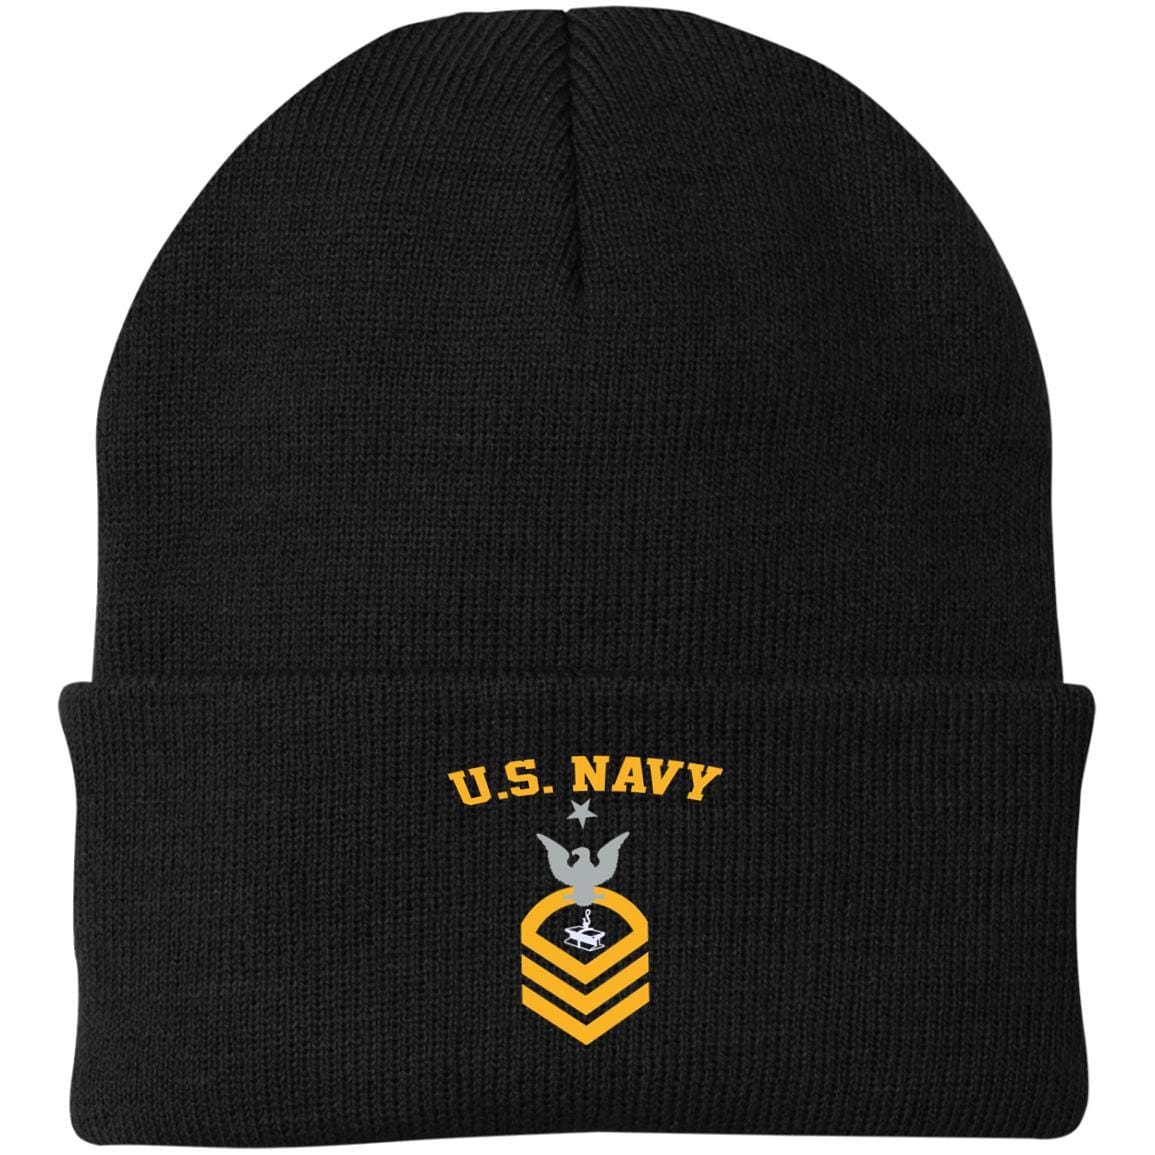 Us Navy Steelworker Sw E-8 Rating Badges Printed Port Authority Knit Cap